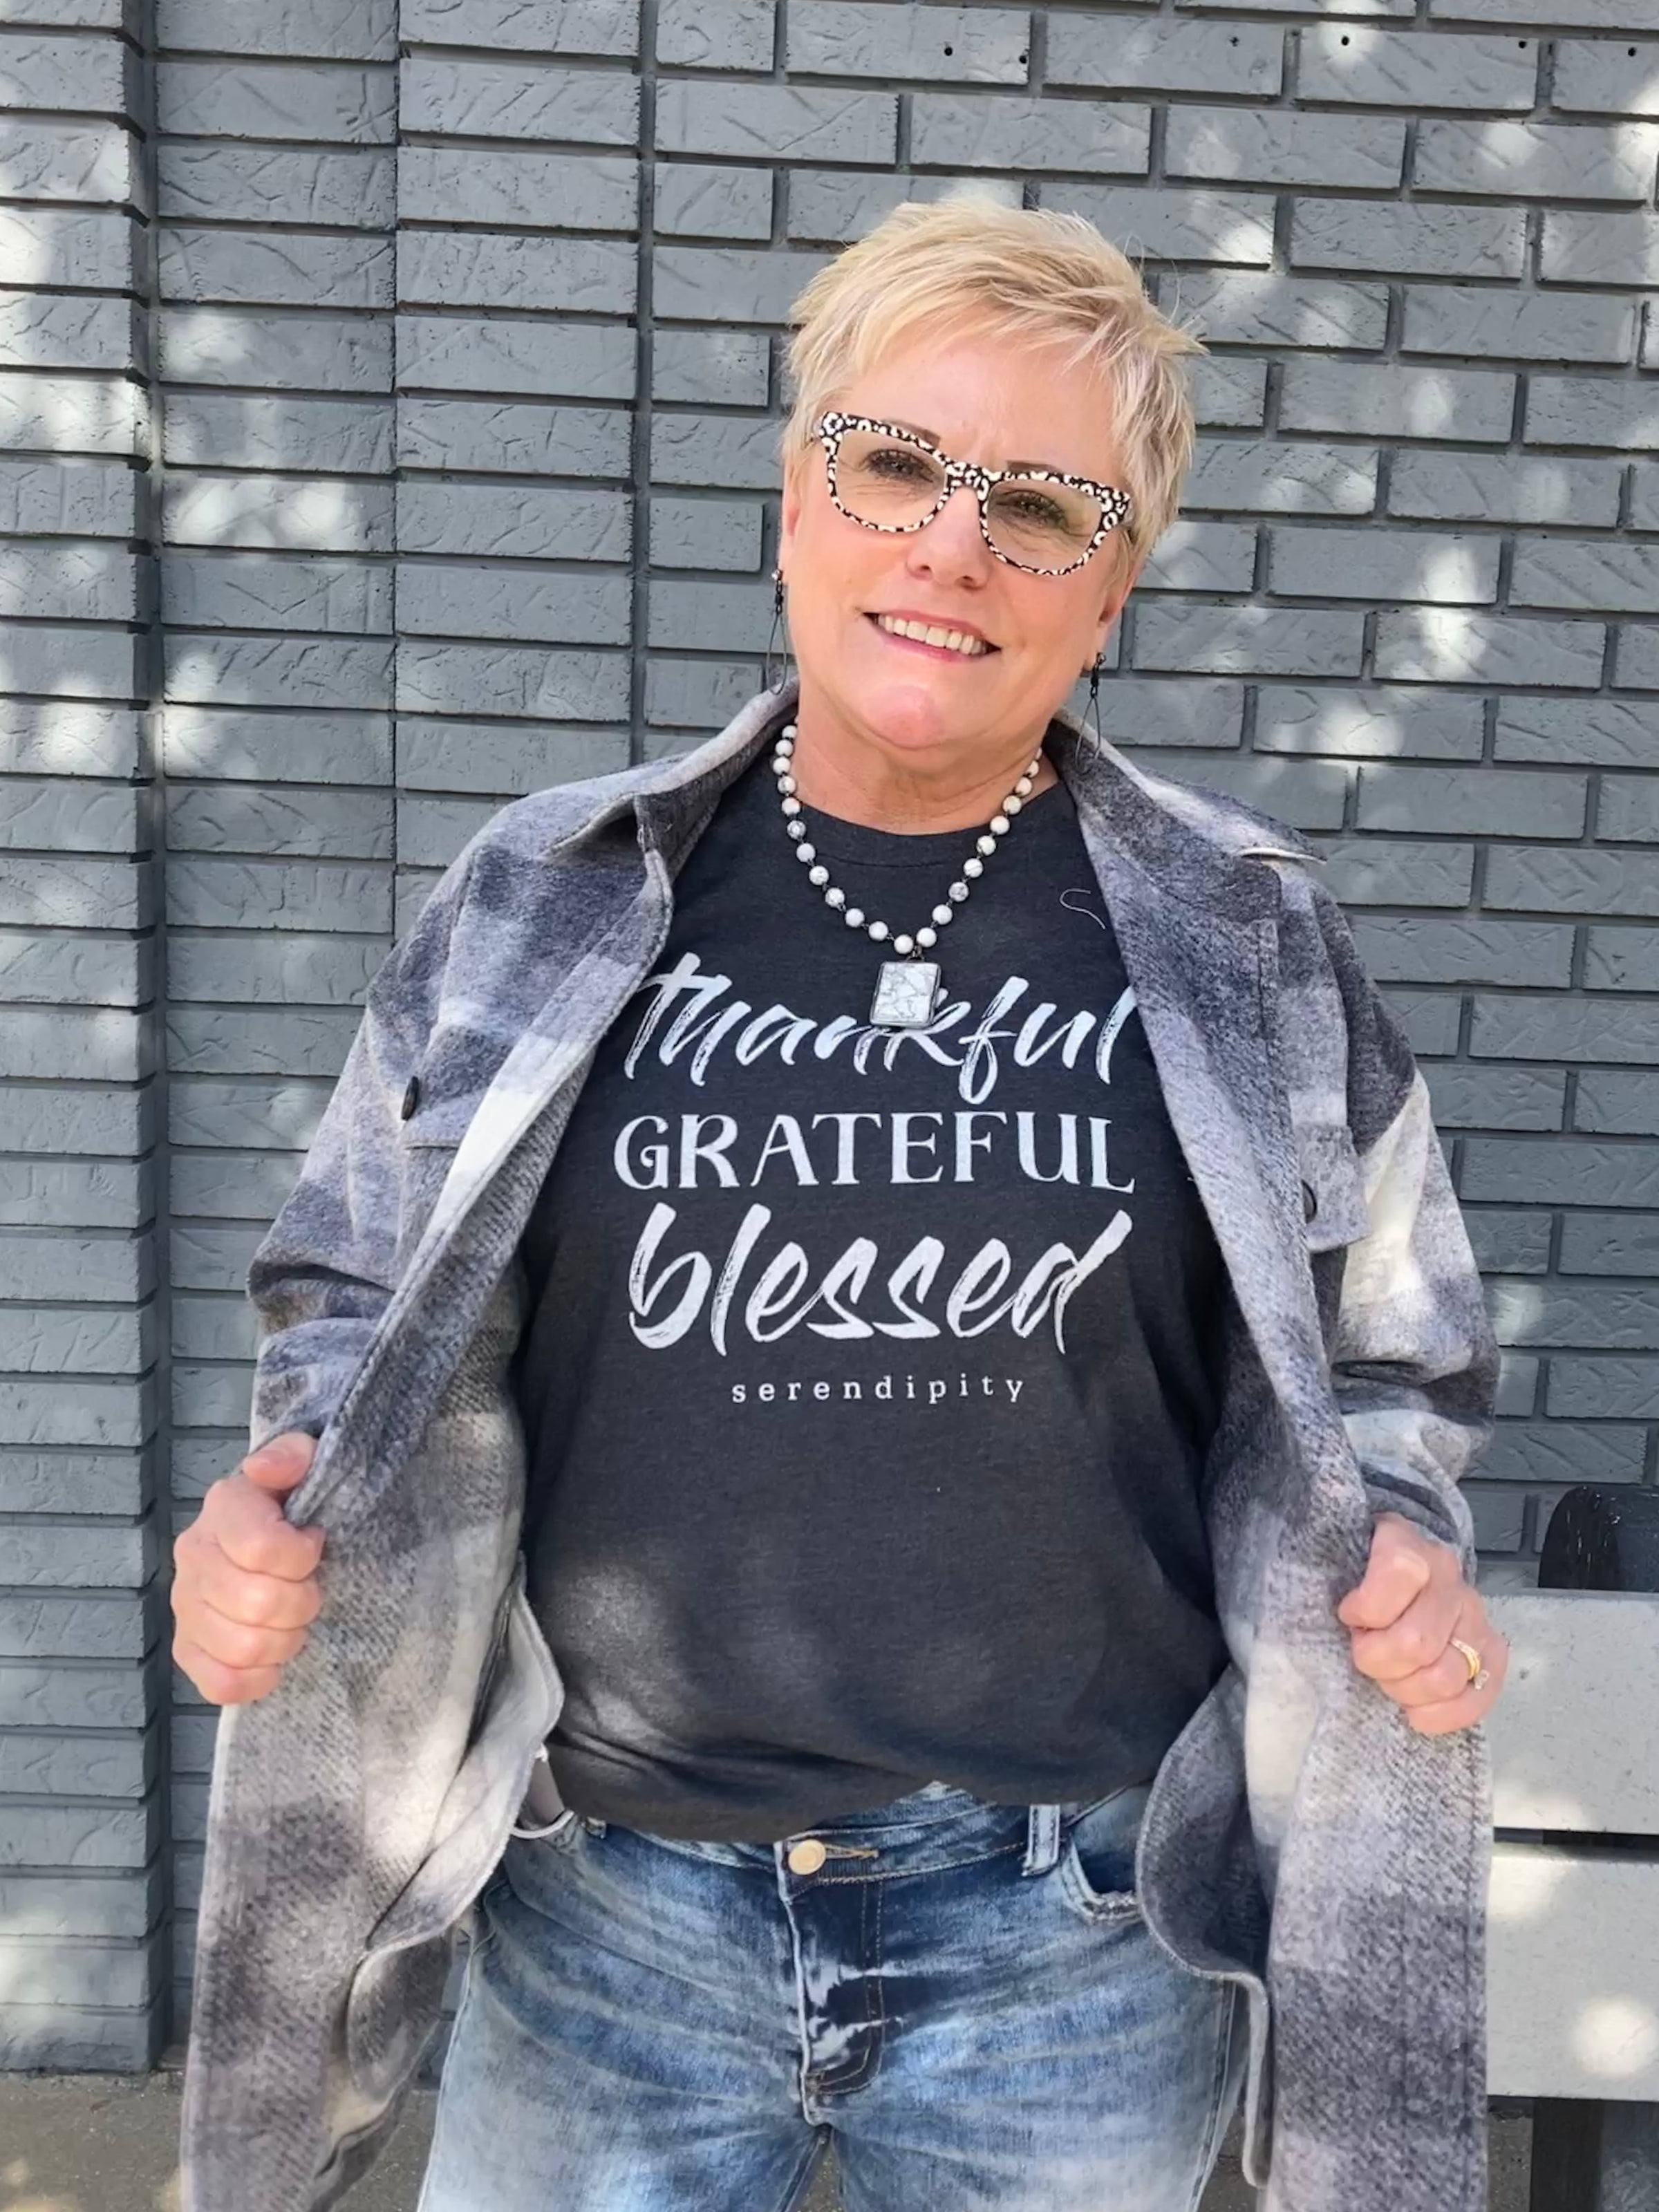 Woman Wearing a grey "thankful, grateful, blessed" graphic shirt with a grey flannel shacket over it.